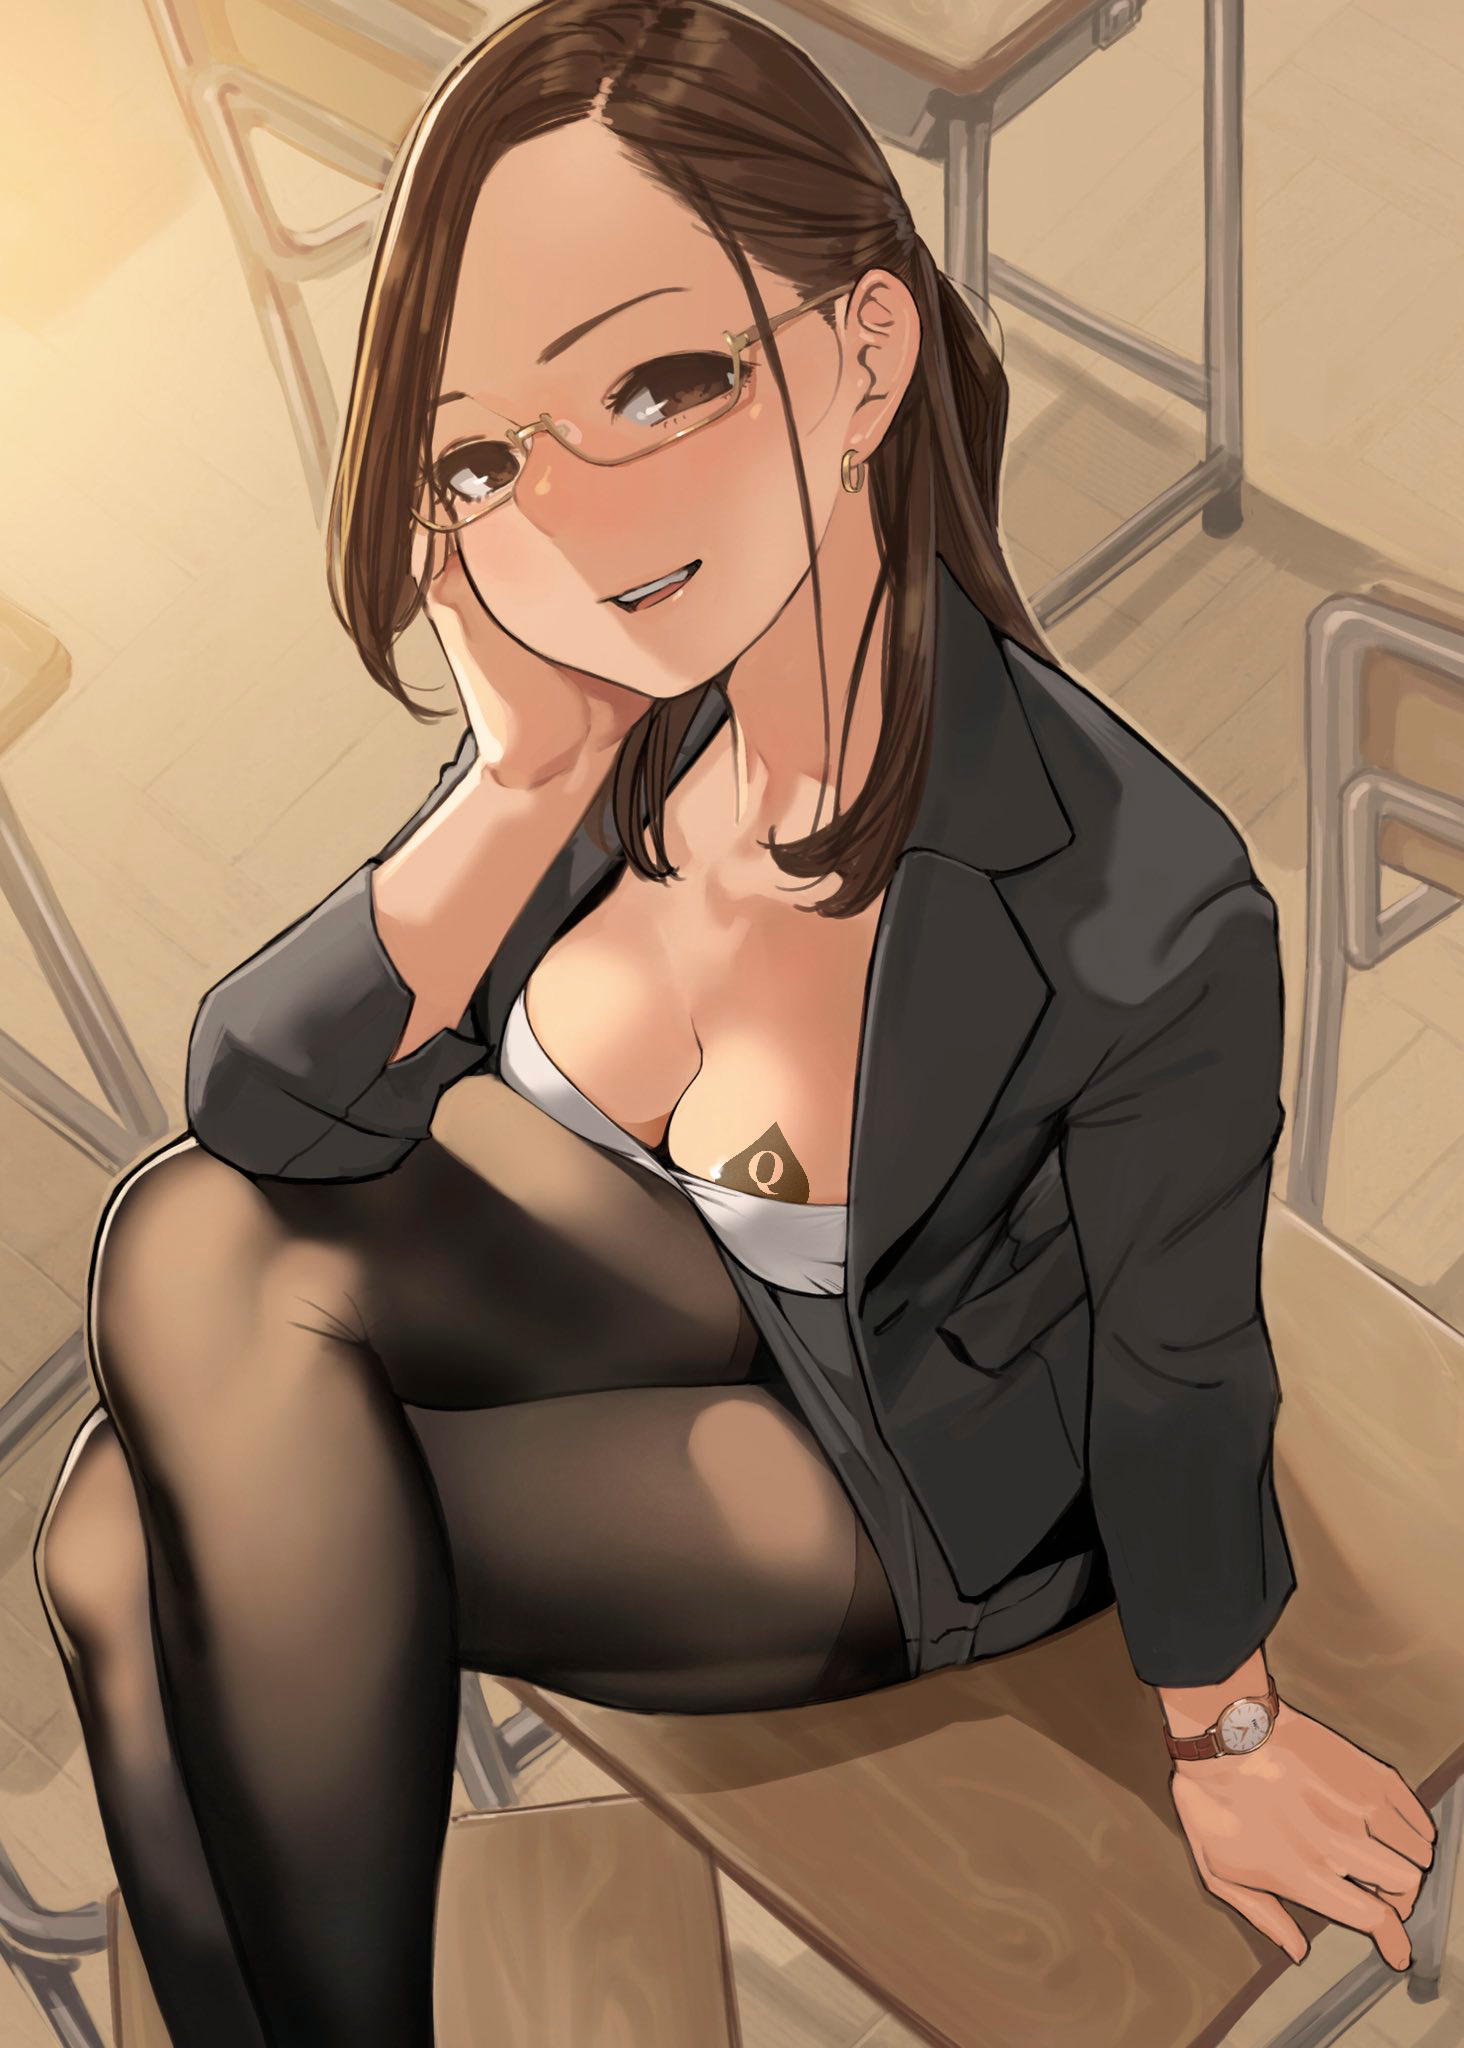 Anime 1464x2048 Queen of Spades women smiling anime girls fictional character boobs looking at viewer desk glasses women with glasses brunette brown eyes resting head head tilt cleavage legs crossed pantyhose black pantyhose watch sitting teeth sunlight earring long hair yomu